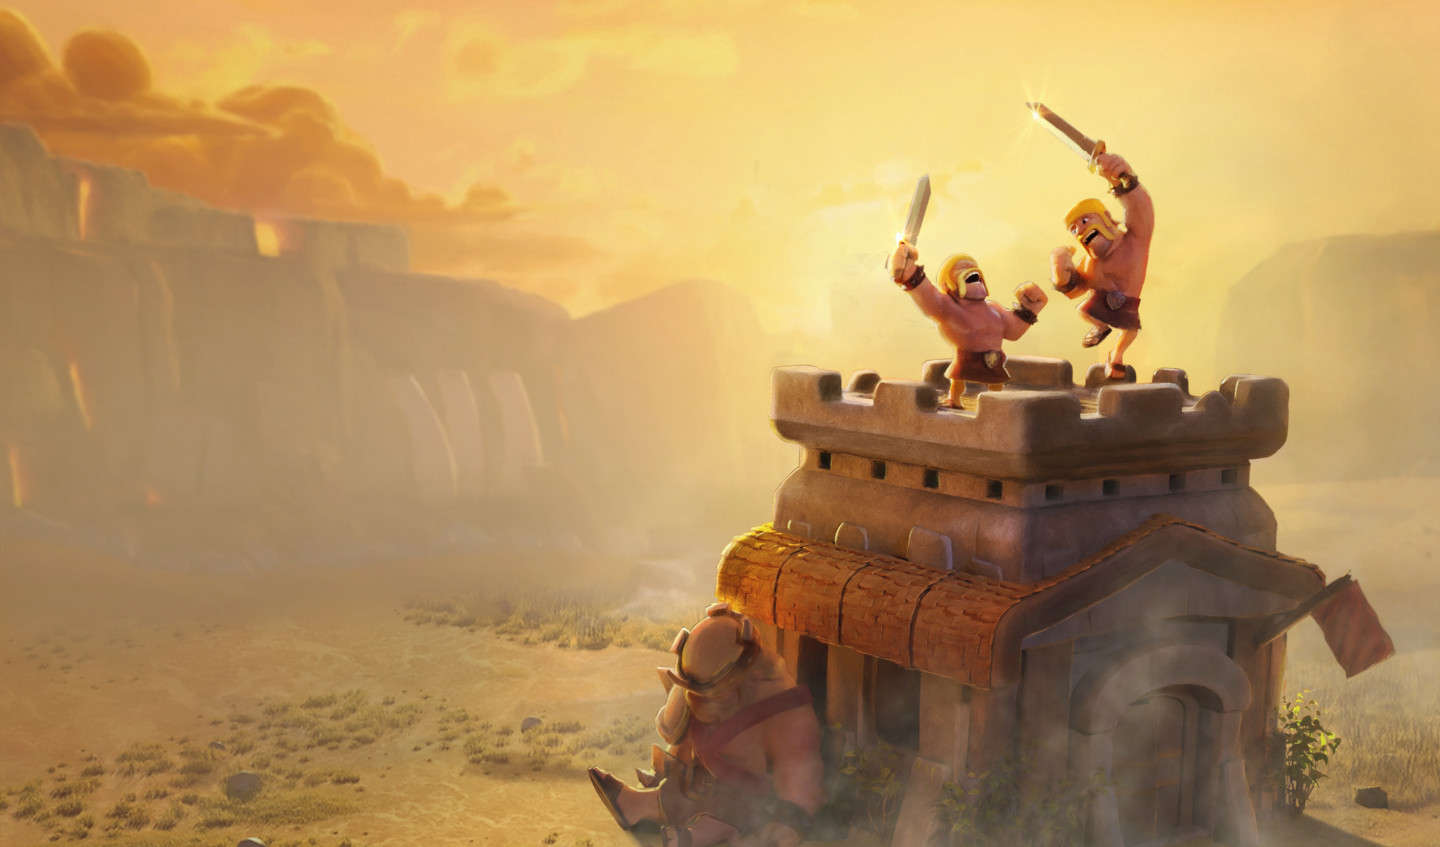 Clash Of Clans September Update To Bring Powerful New Heroes And More